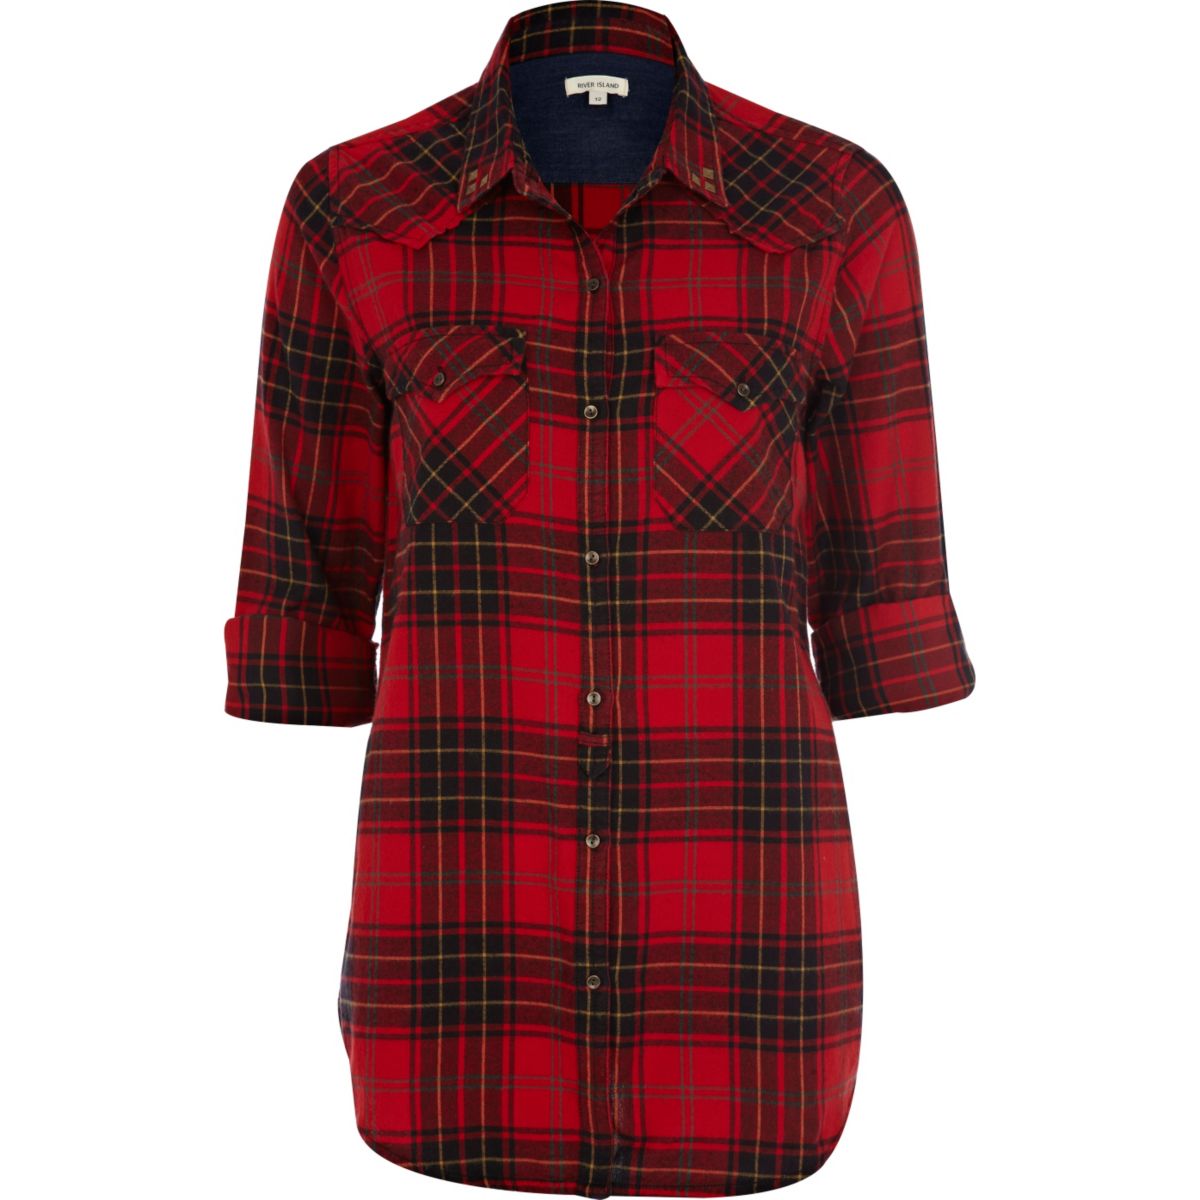 Womens checked shirts sale